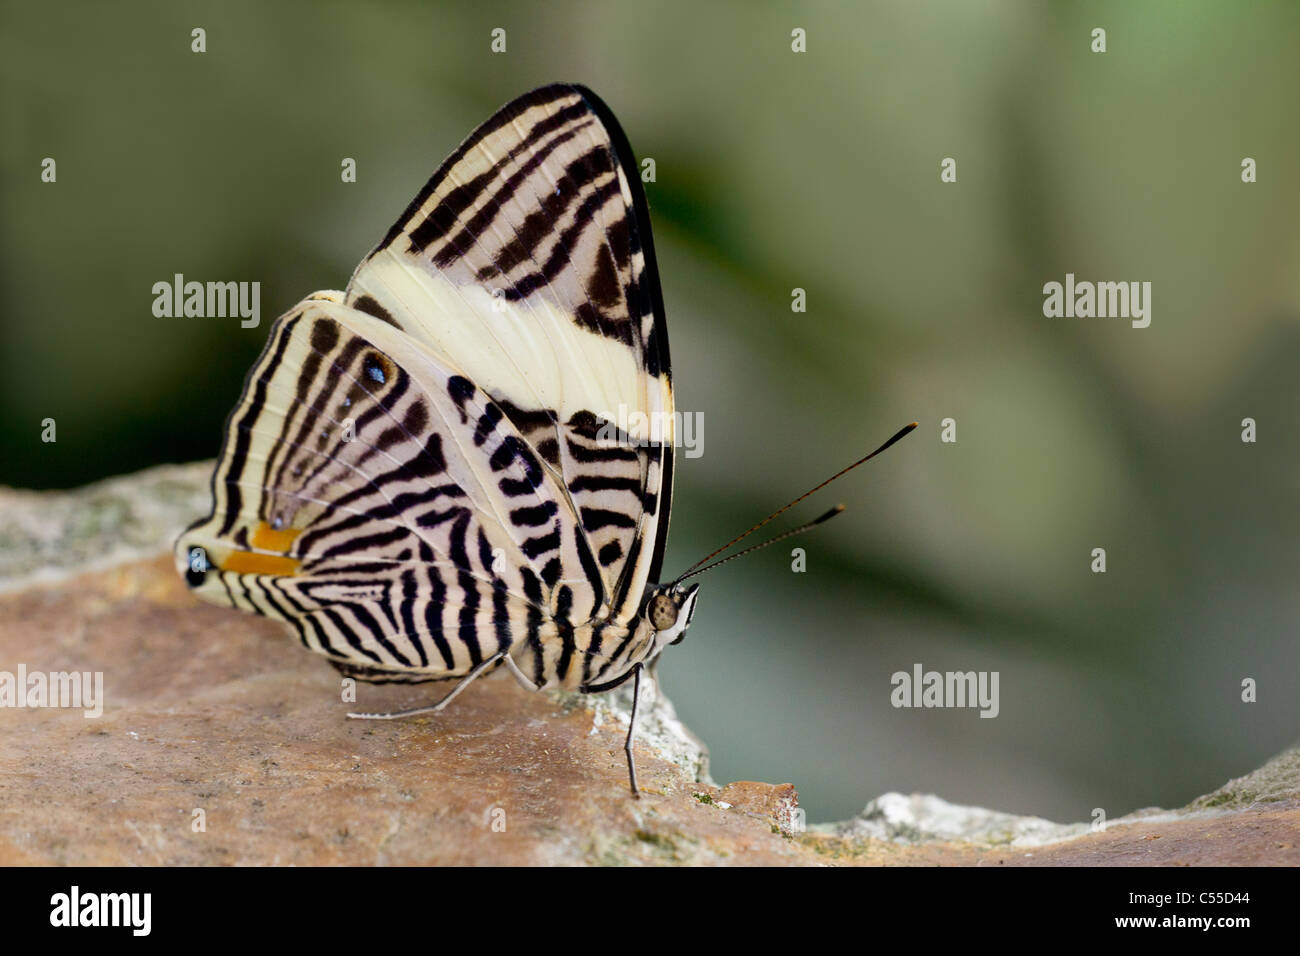 Close-up of a Zebra Mosaic (Colobura dirce) butterfly on a green leaf Stock Photo